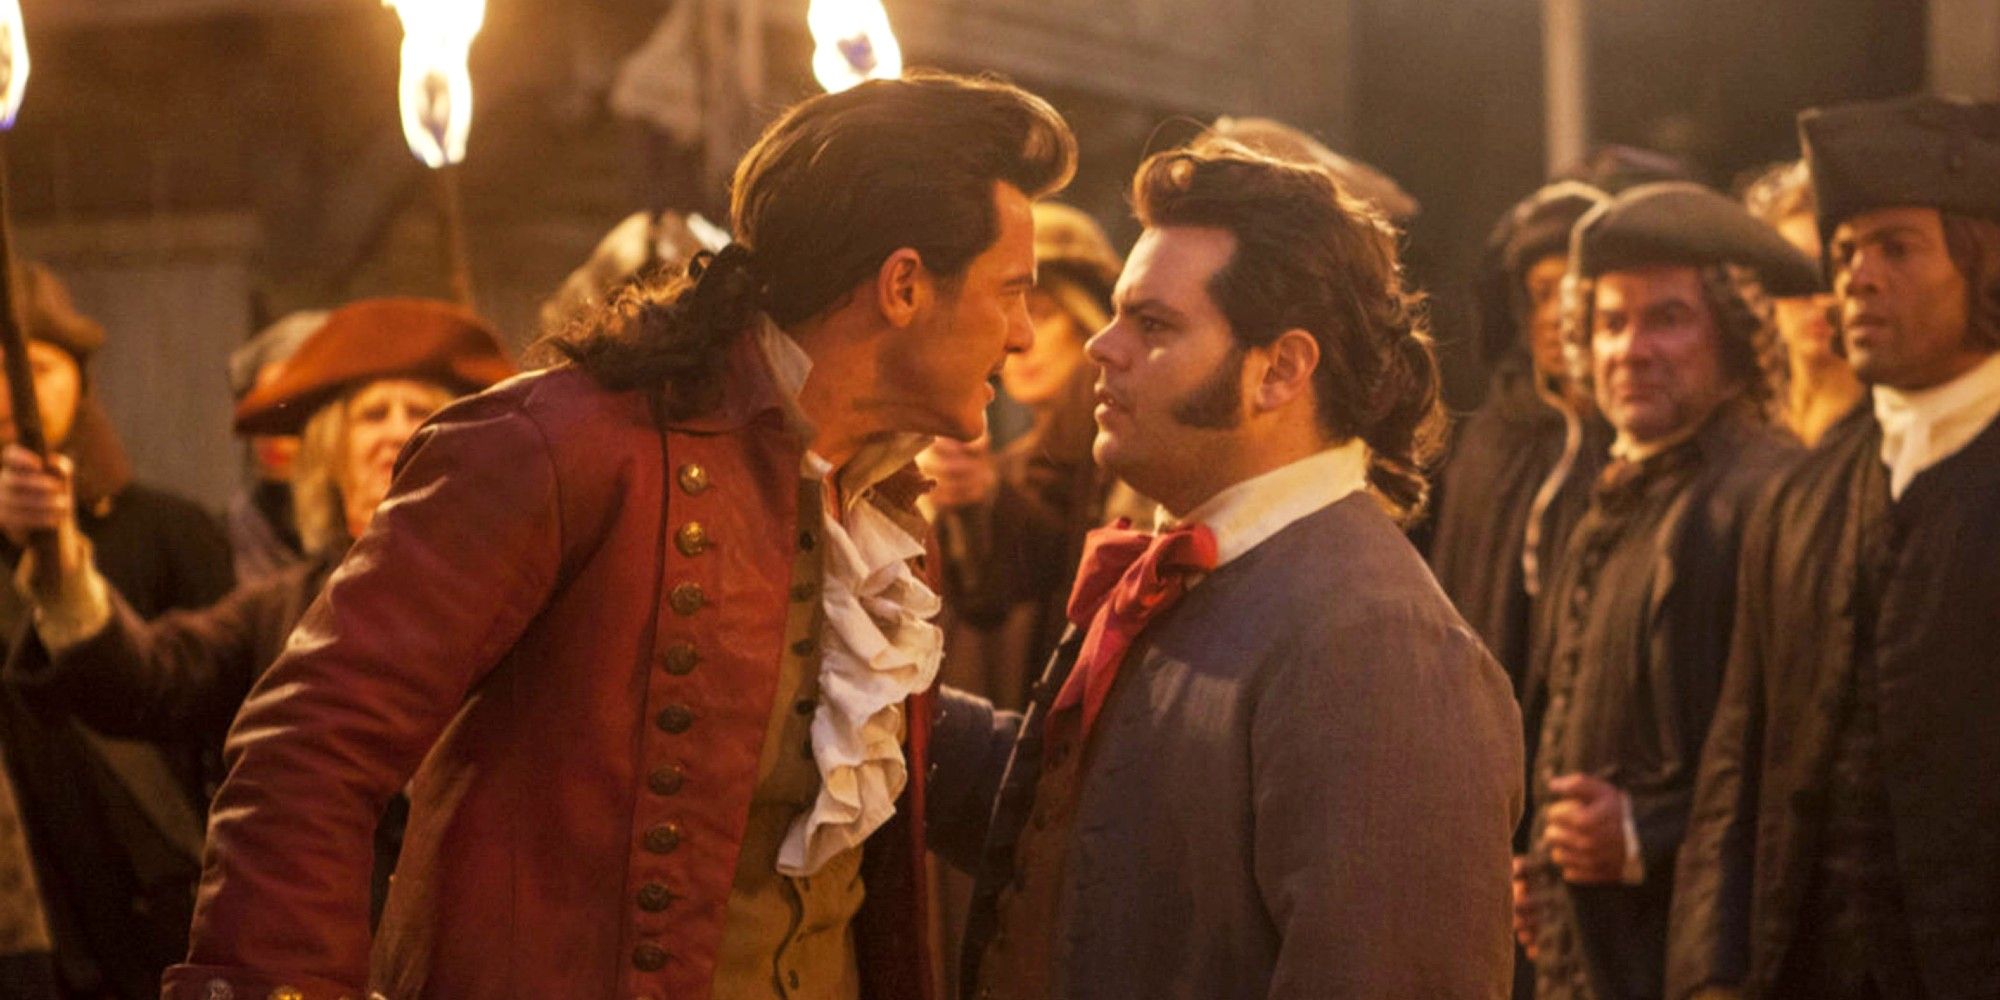 Luke Evans as Gaston and Josh Gad as LeFou in Beauty and the Beast